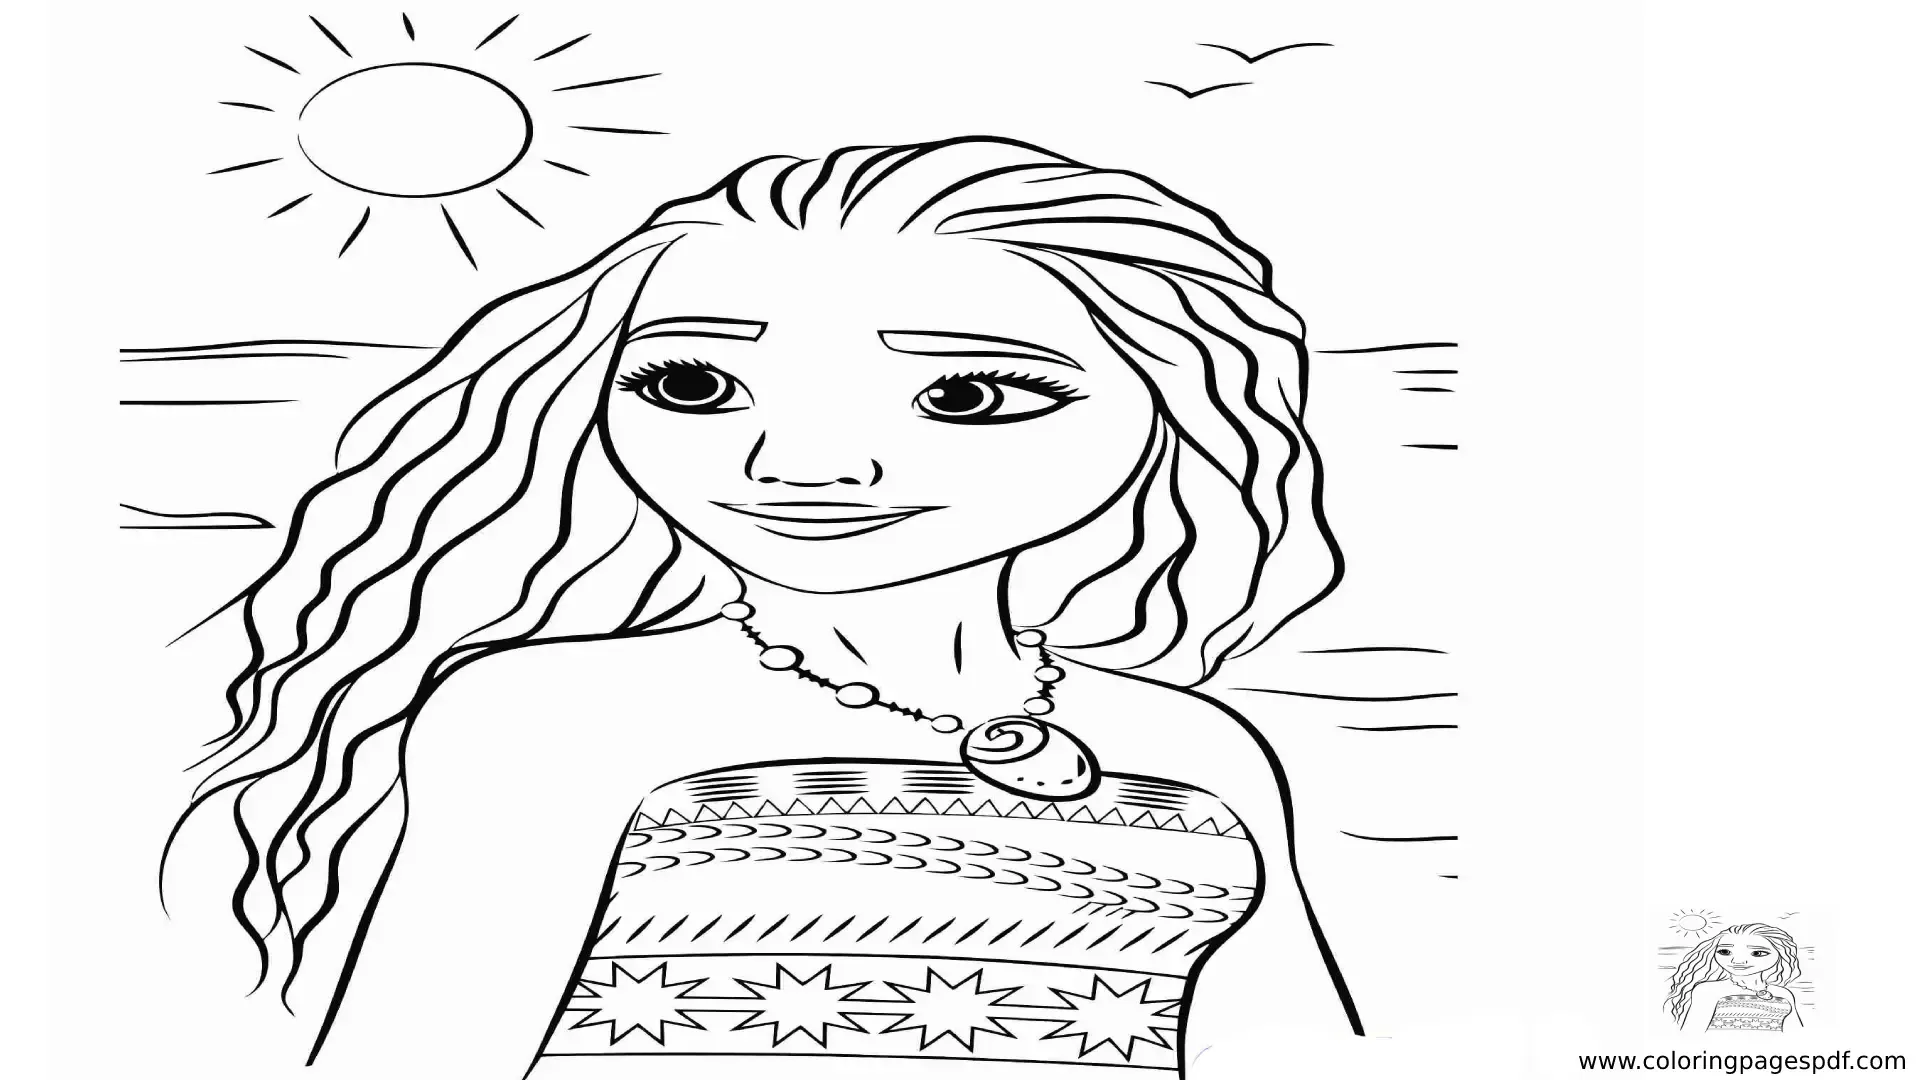 Coloring Pages Of Half Body Moana